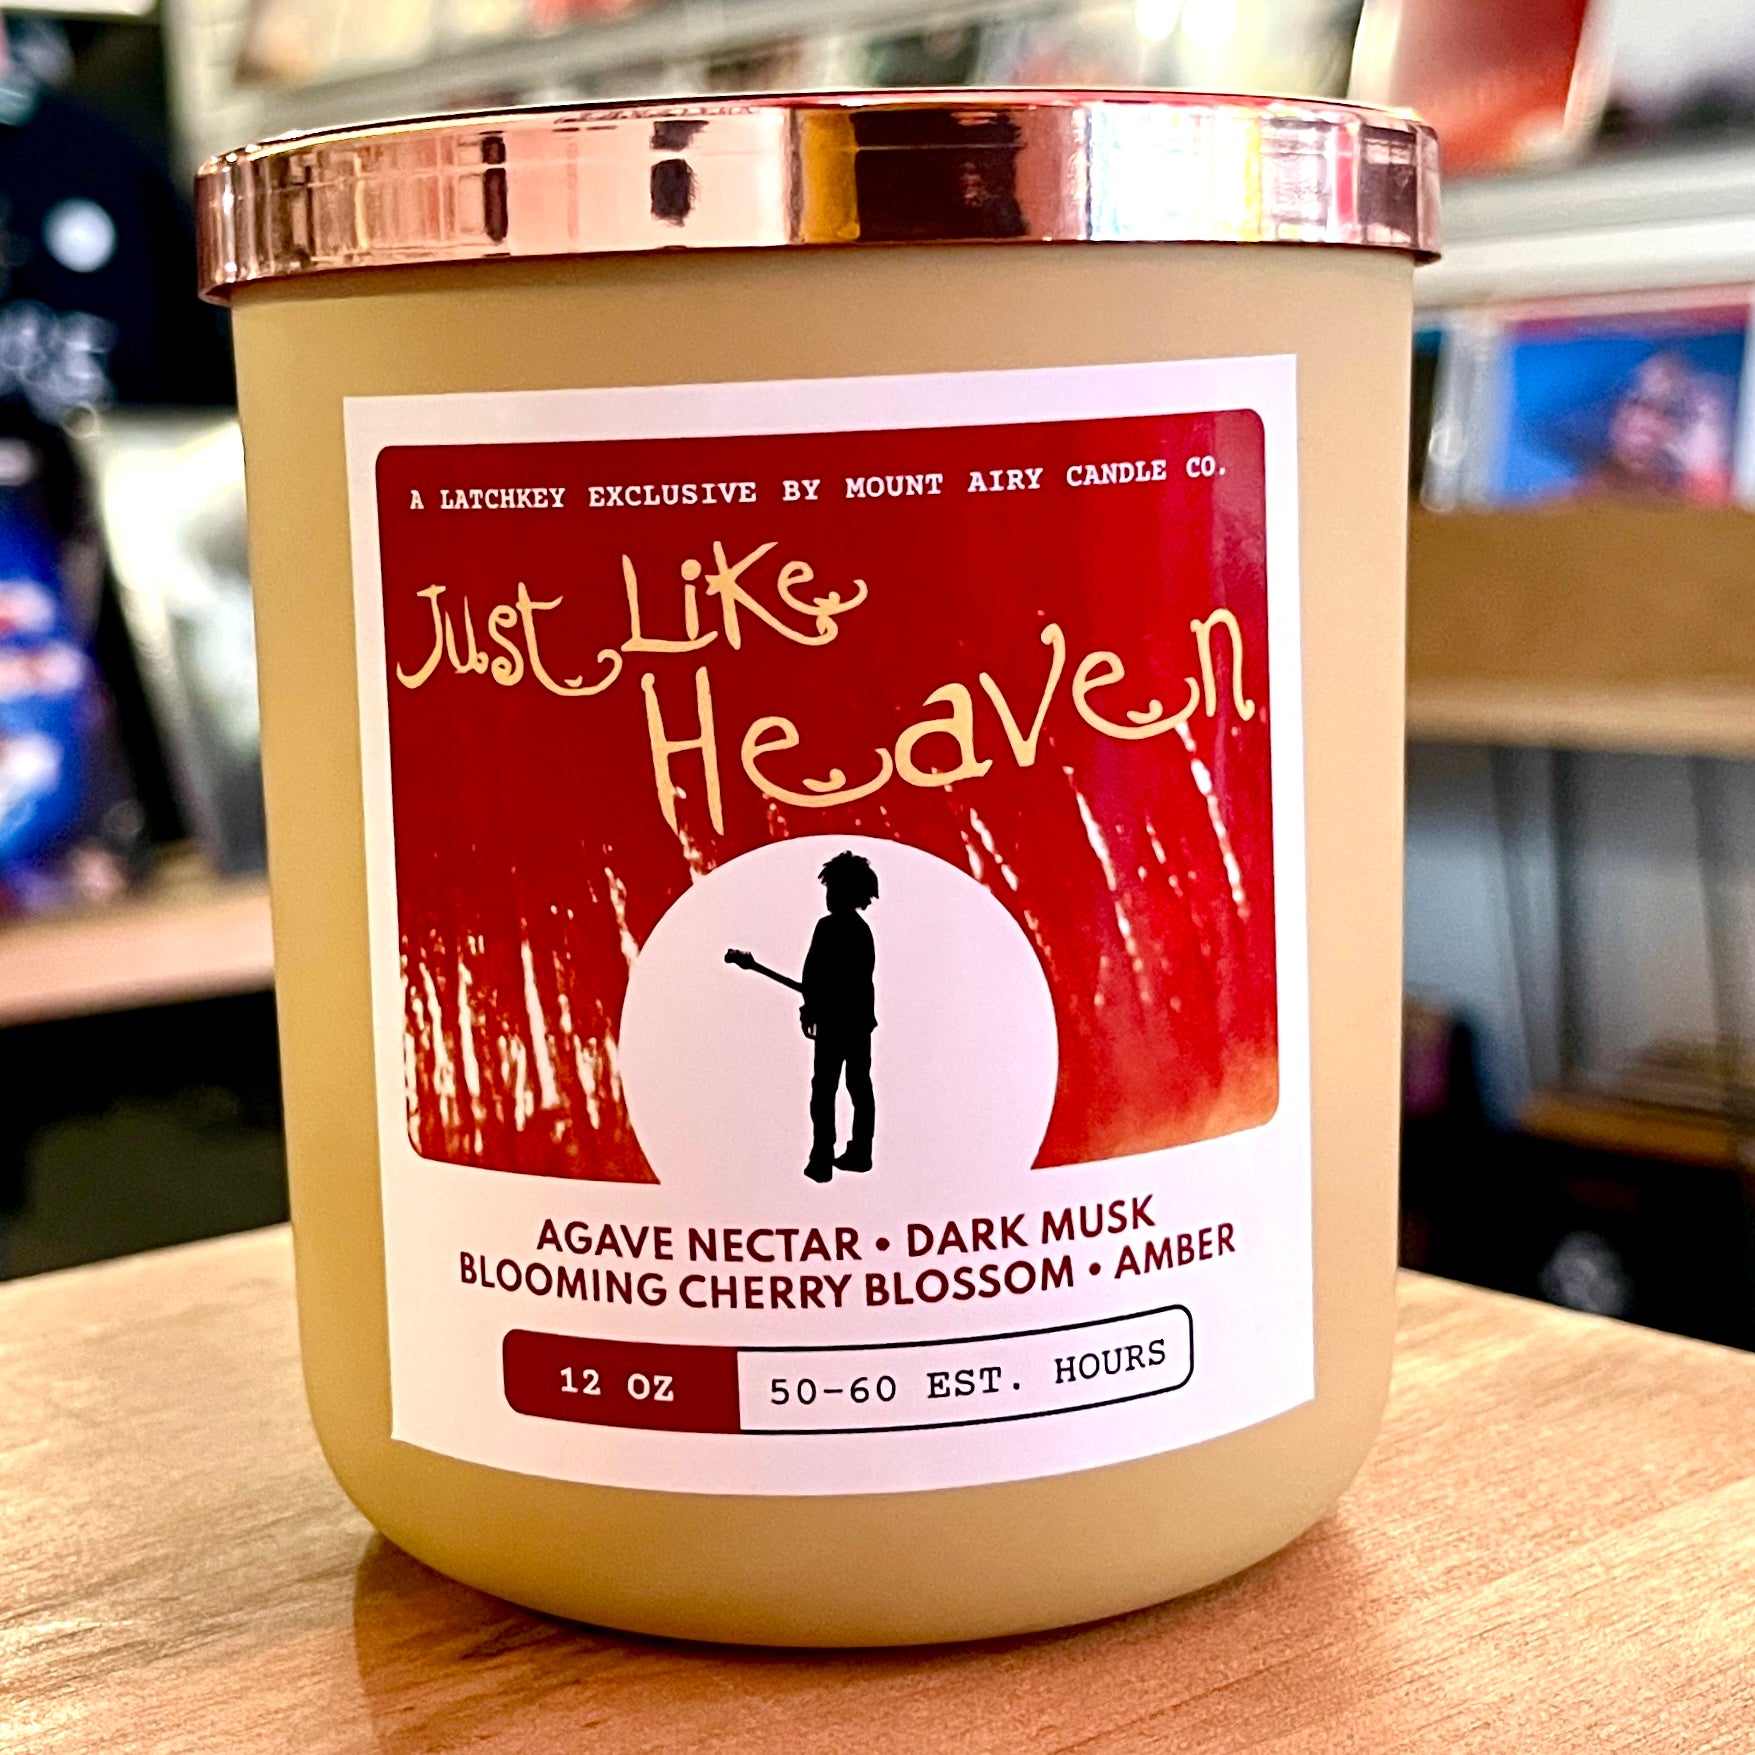 "Just Like Heaven" Candle by Mount Airy Candle Co.